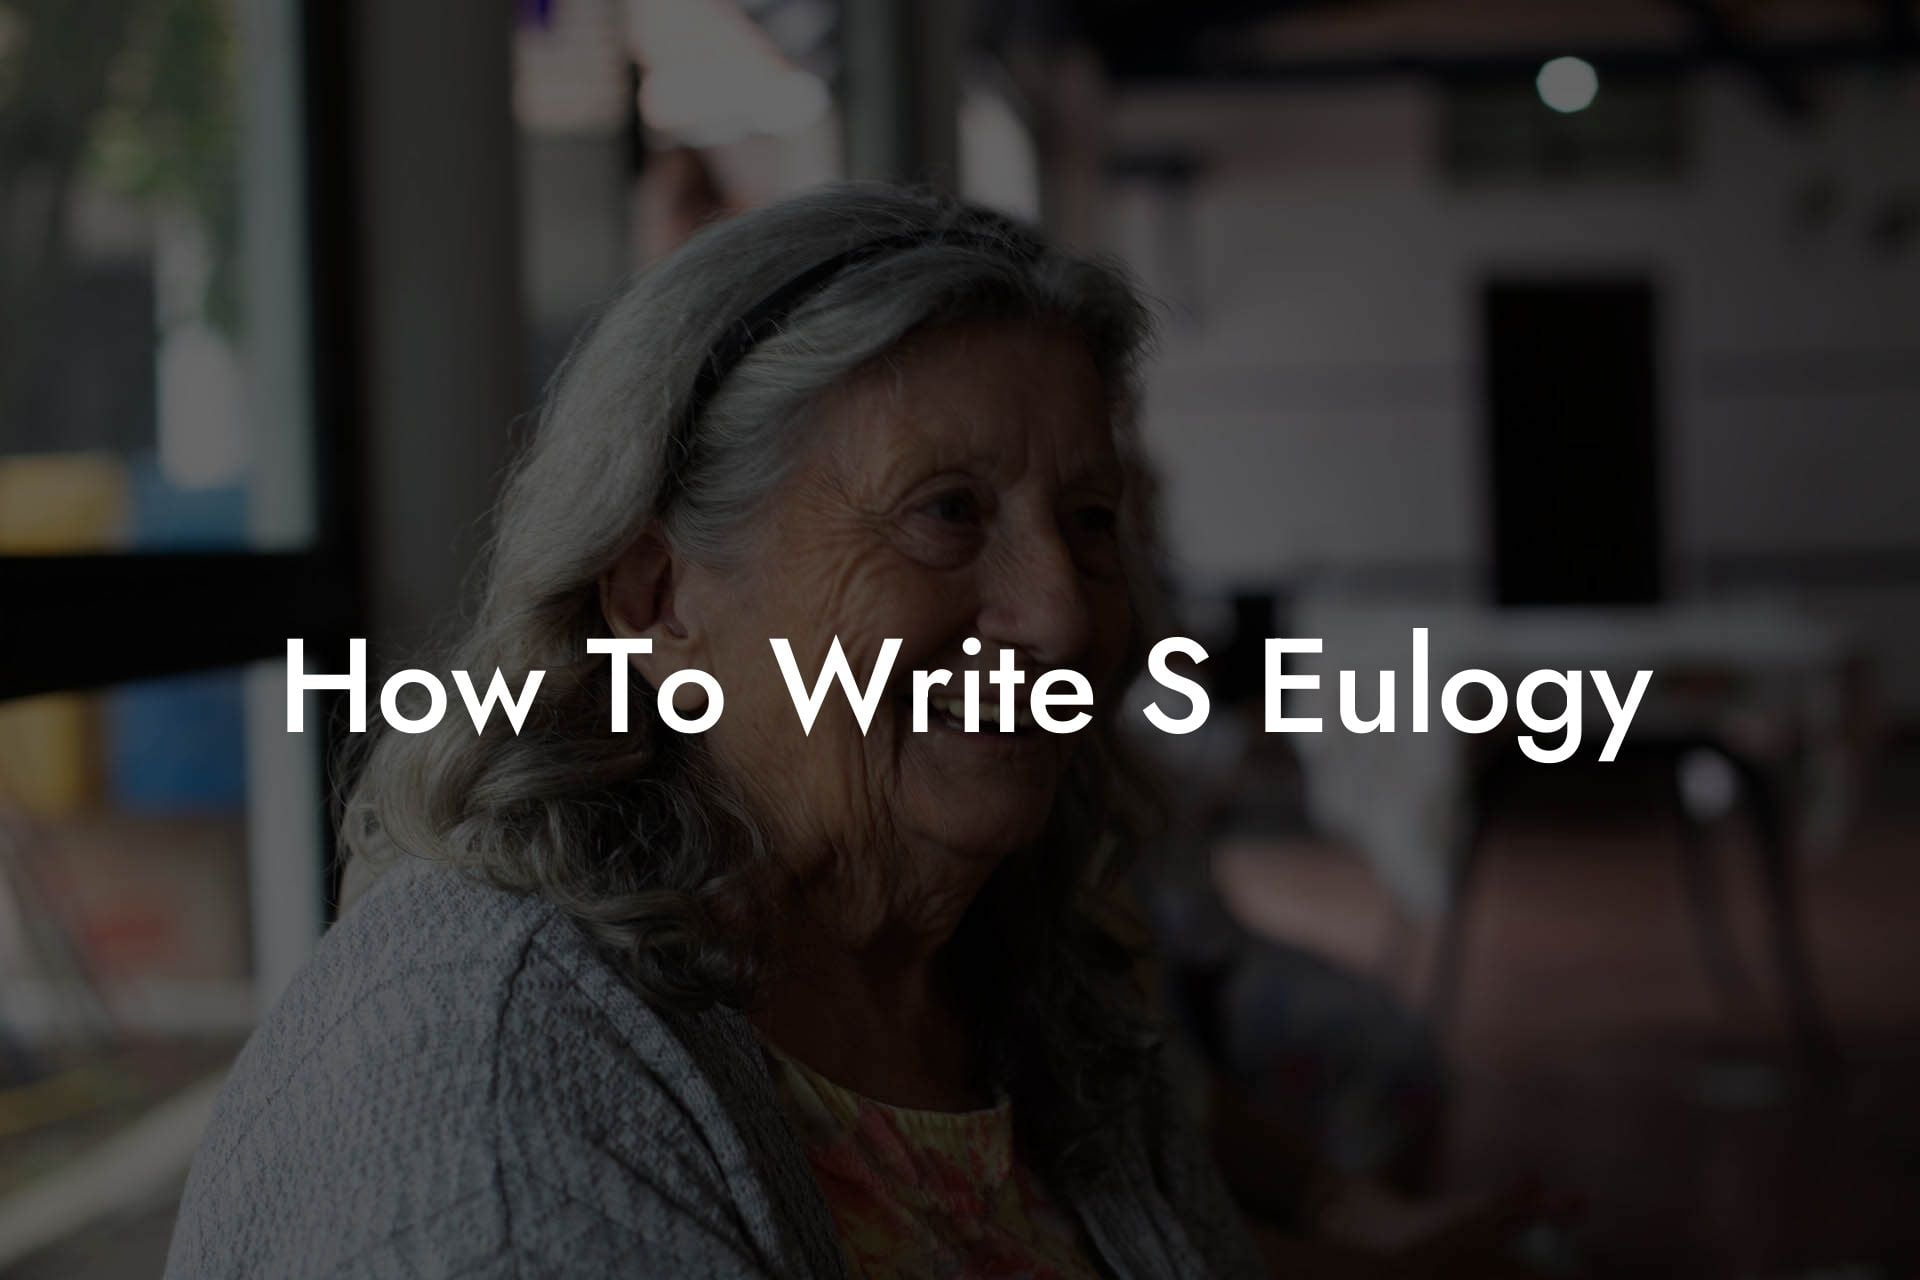 How To Write S Eulogy